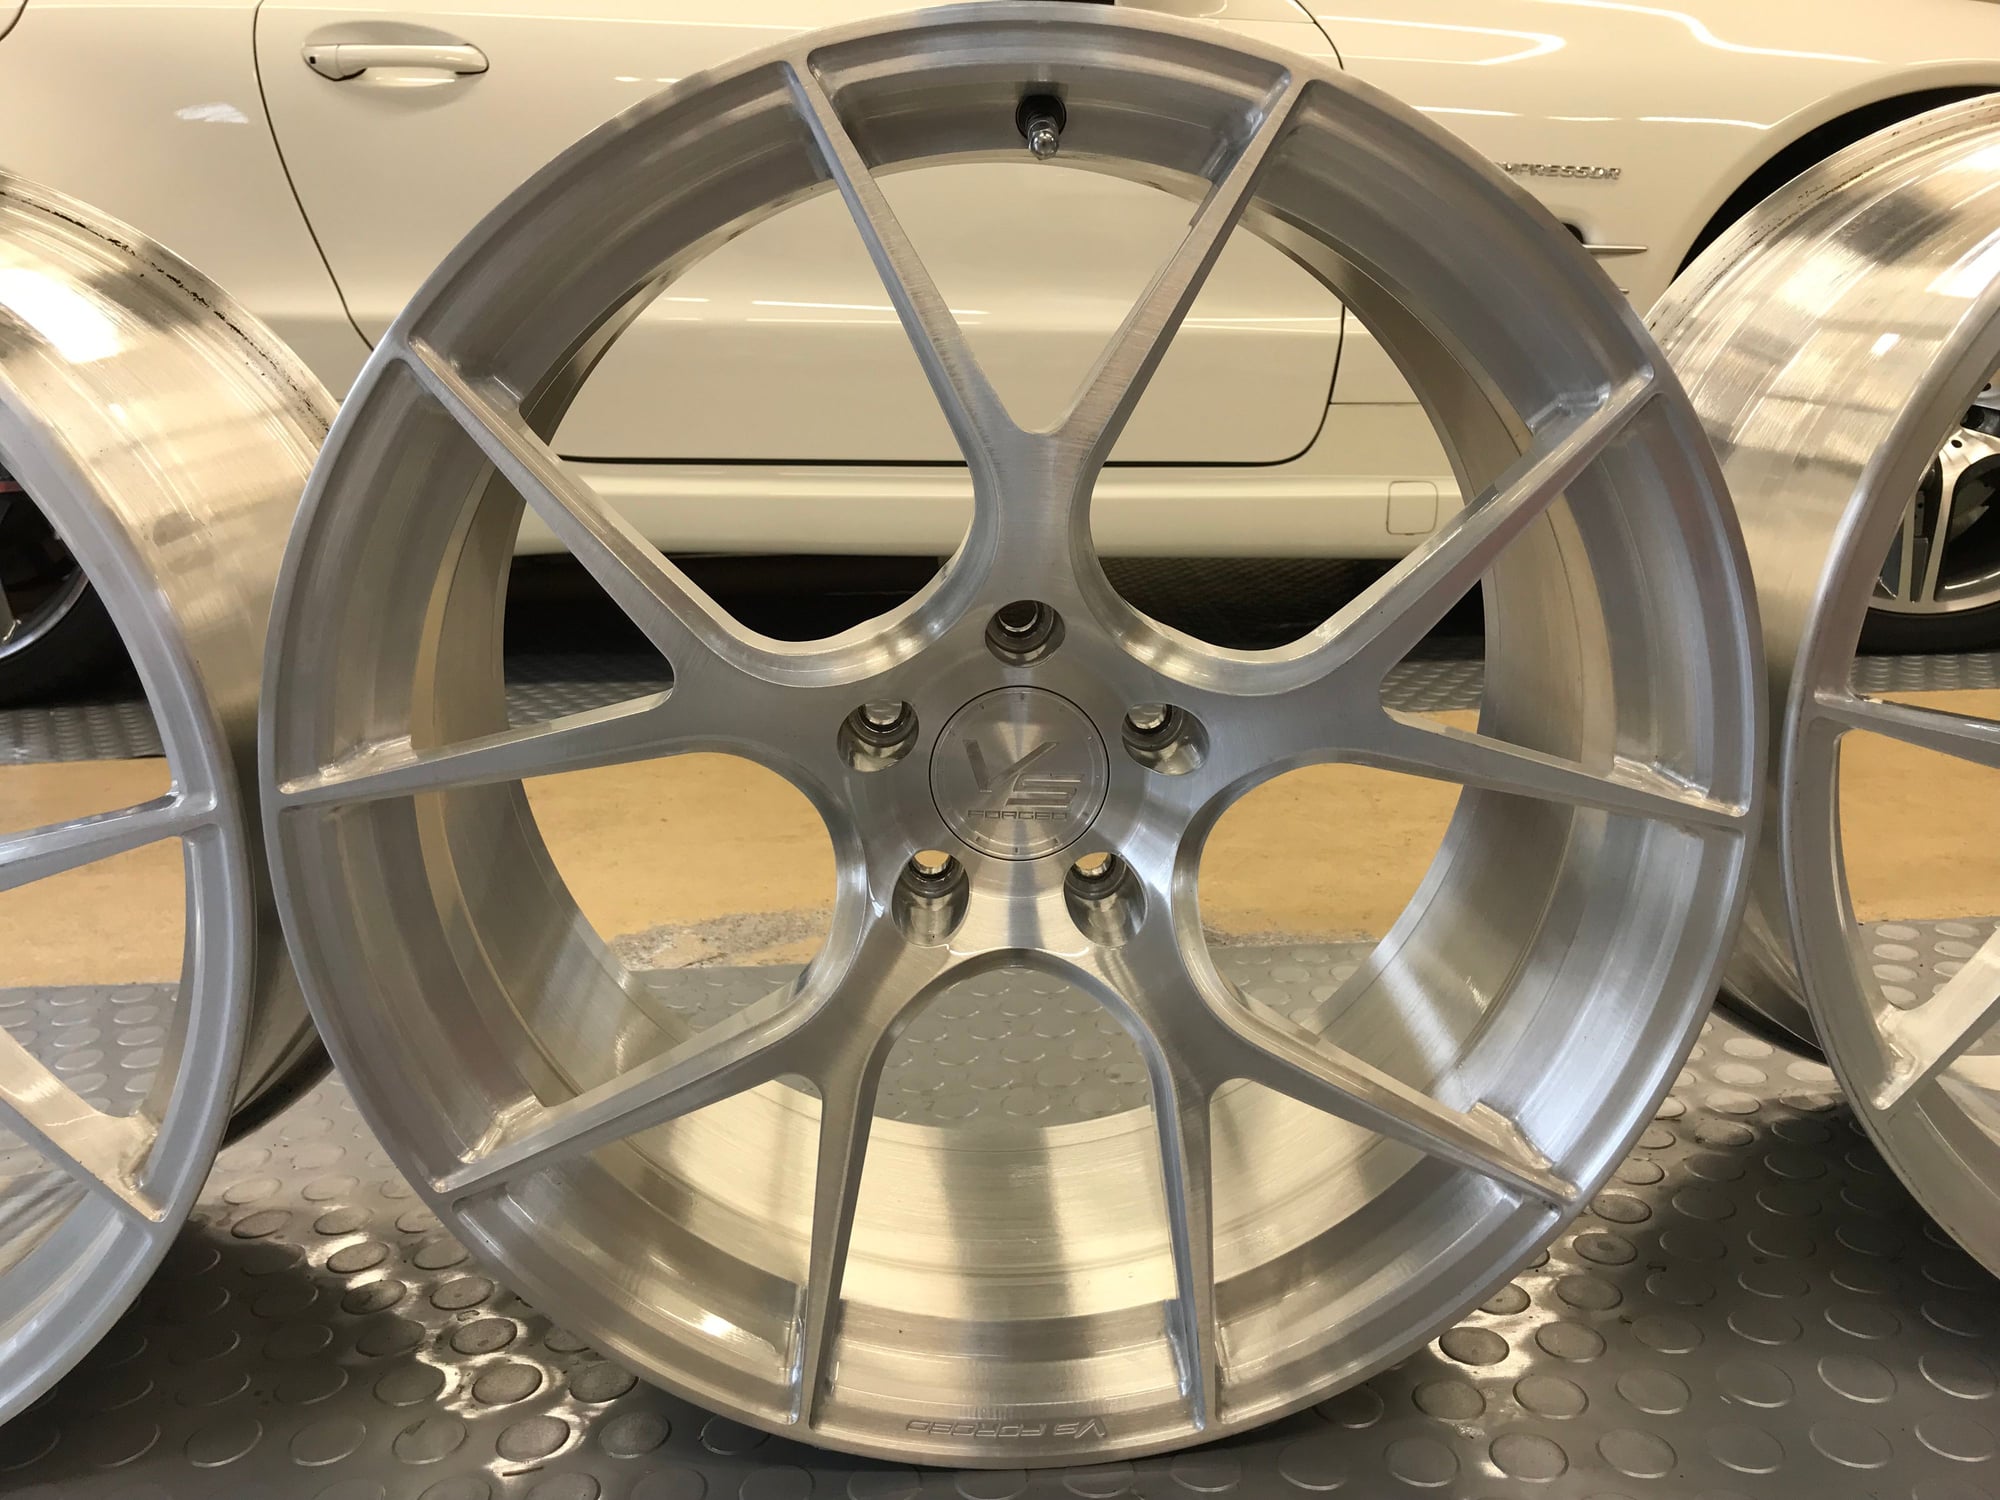 Wheels and Tires/Axles - Brand New VS Forged VS02 Wheels for R230 - Brushed Clear Finish - $1,950 - New - 2003 to 2008 Mercedes-Benz SL55 AMG - 2003 to 2008 Mercedes-Benz SL65 AMG - 2009 to 2012 Mercedes-Benz SL63 AMG - Fairfield, CT 06824, United States